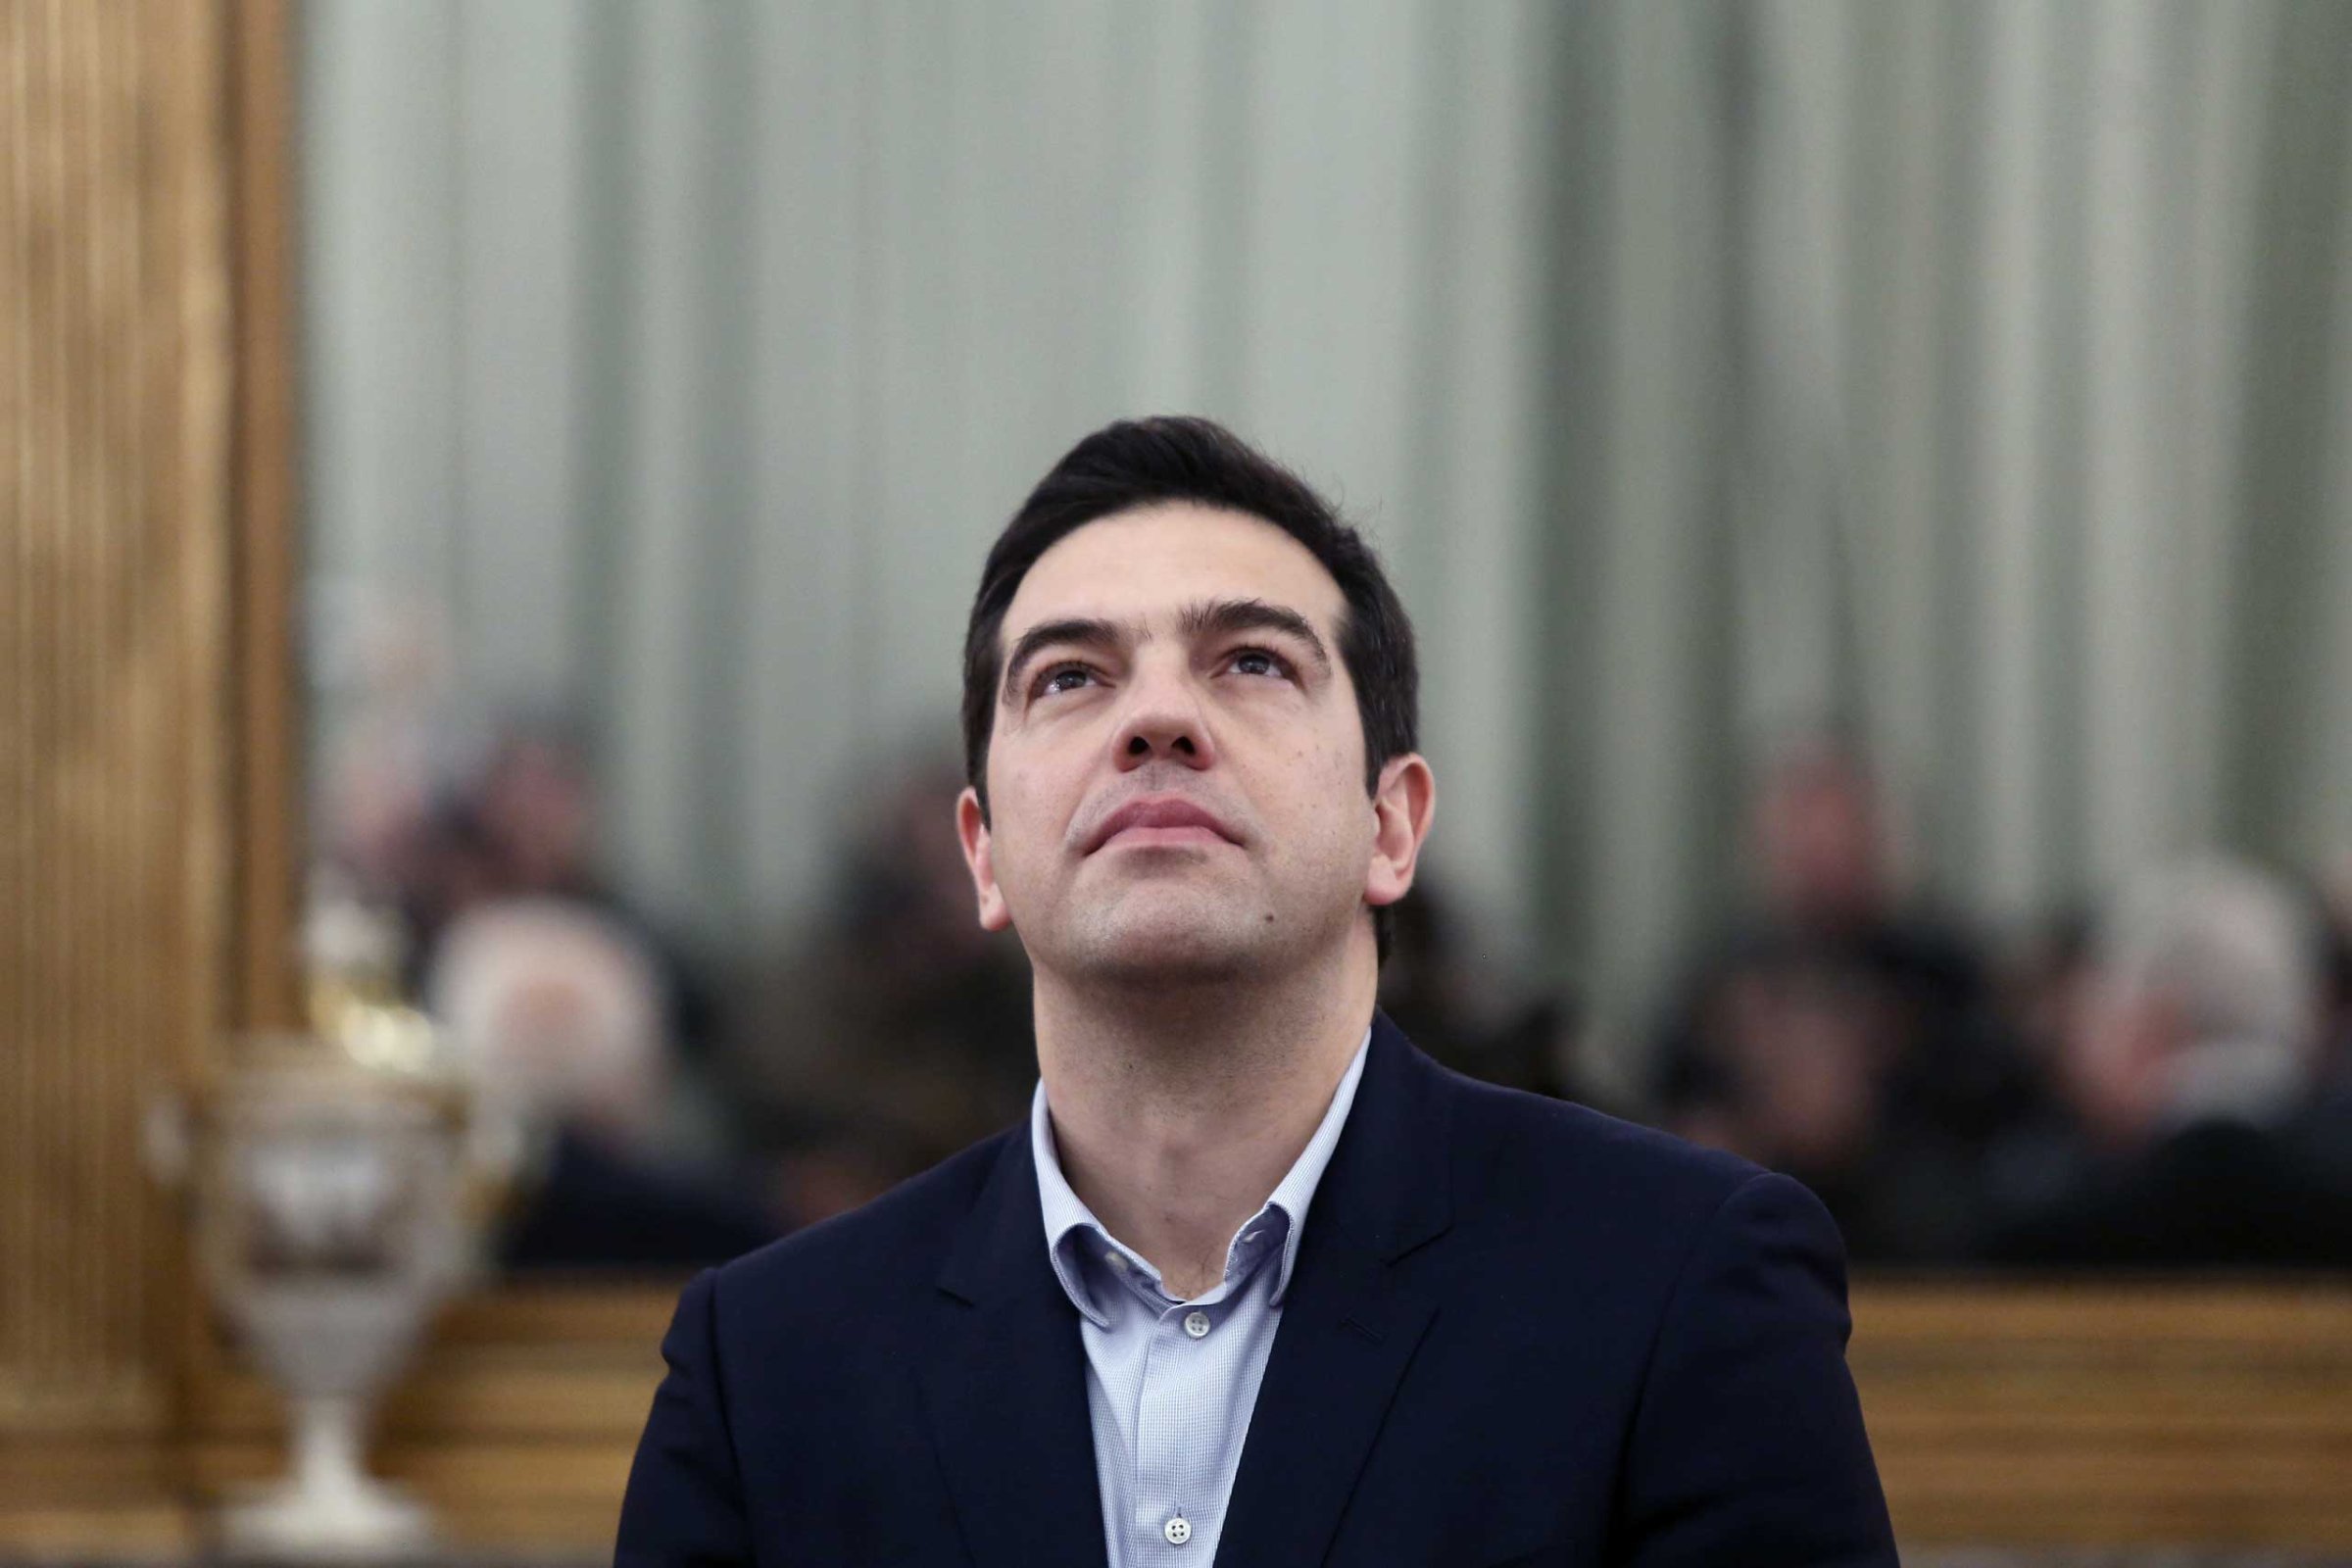 Greek Prime Minister and Syriza party leader Alexis Tsipras, at the Presidential palace during the swearing in ceremony of the new Greek Government, Athens, Jan. 27, 2015 .